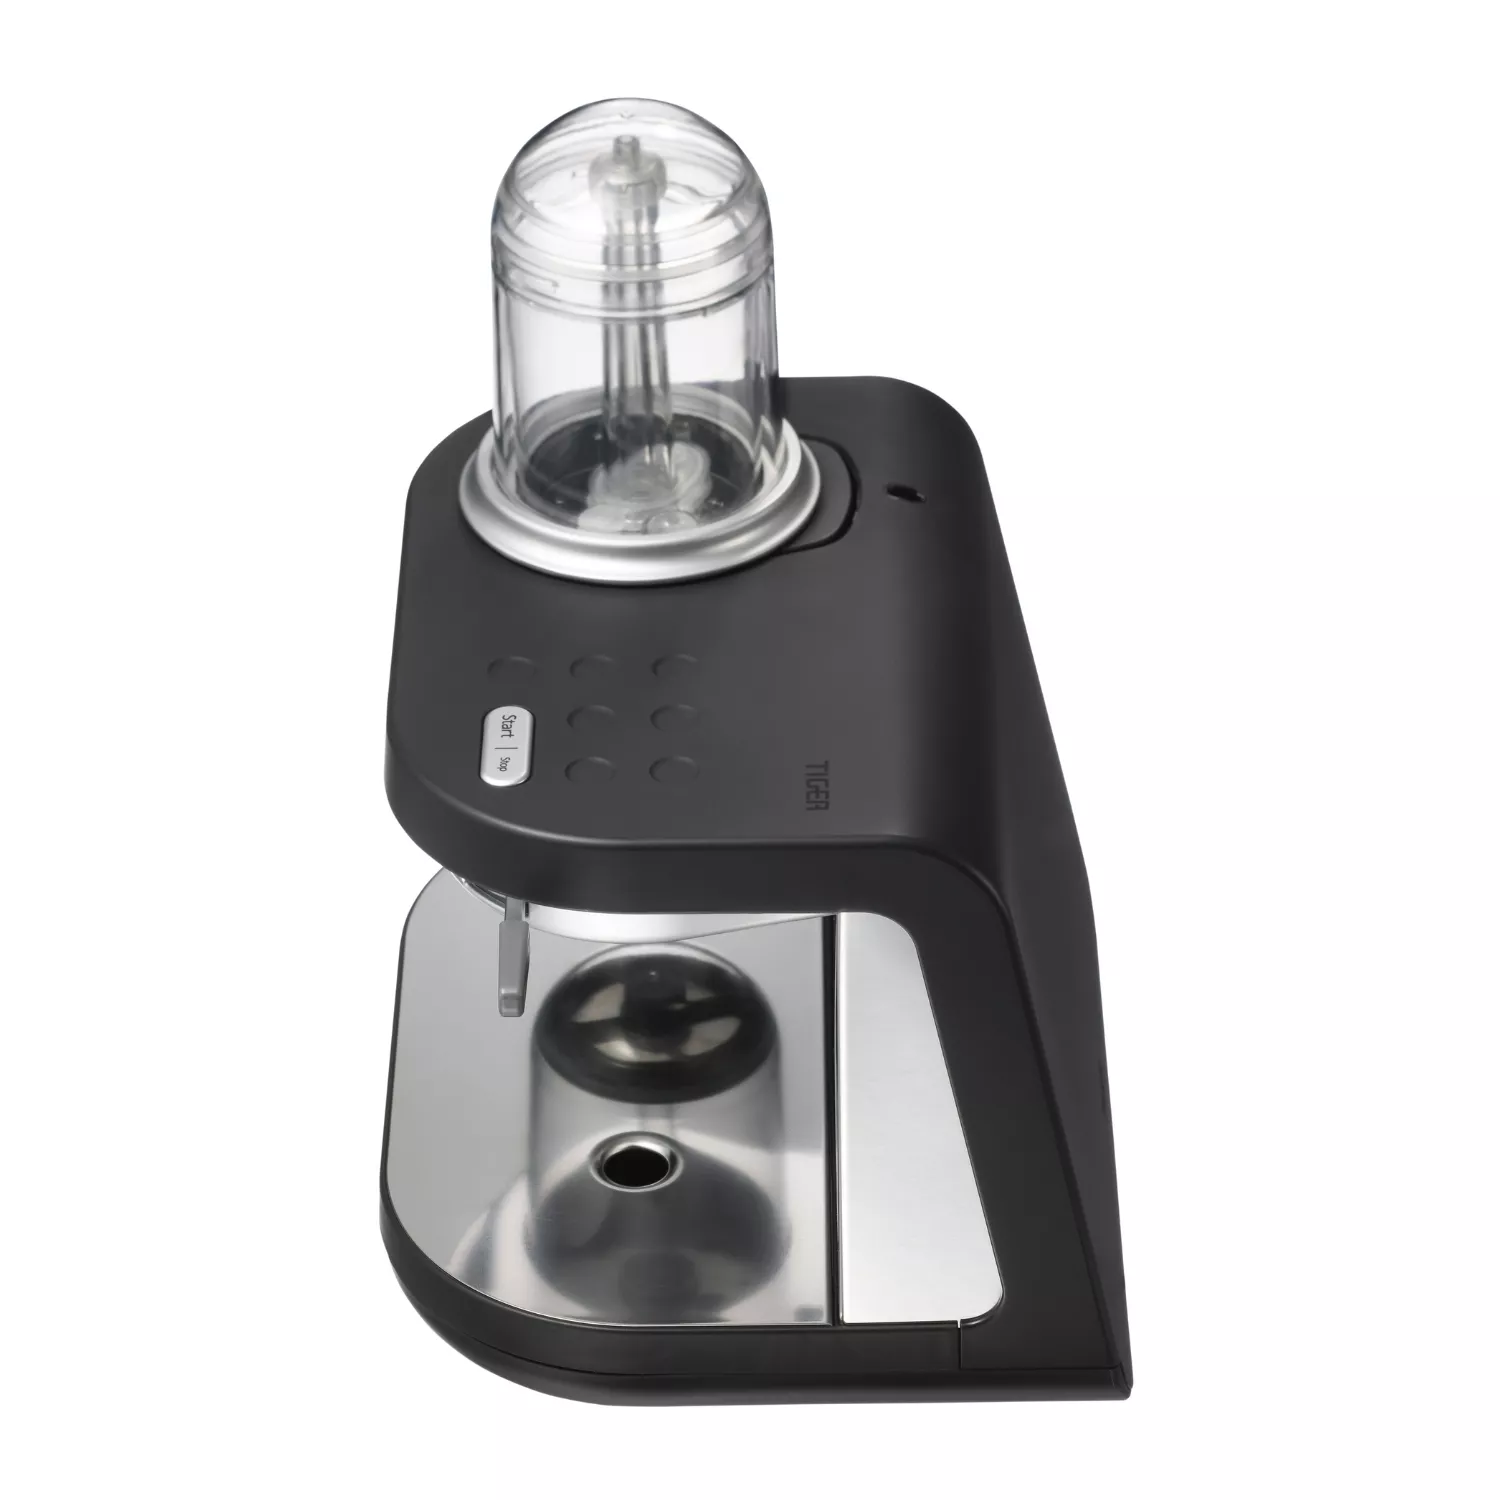 Tiger Siphonysta Automated Siphon Brewing Coffee Maker Onyx Black